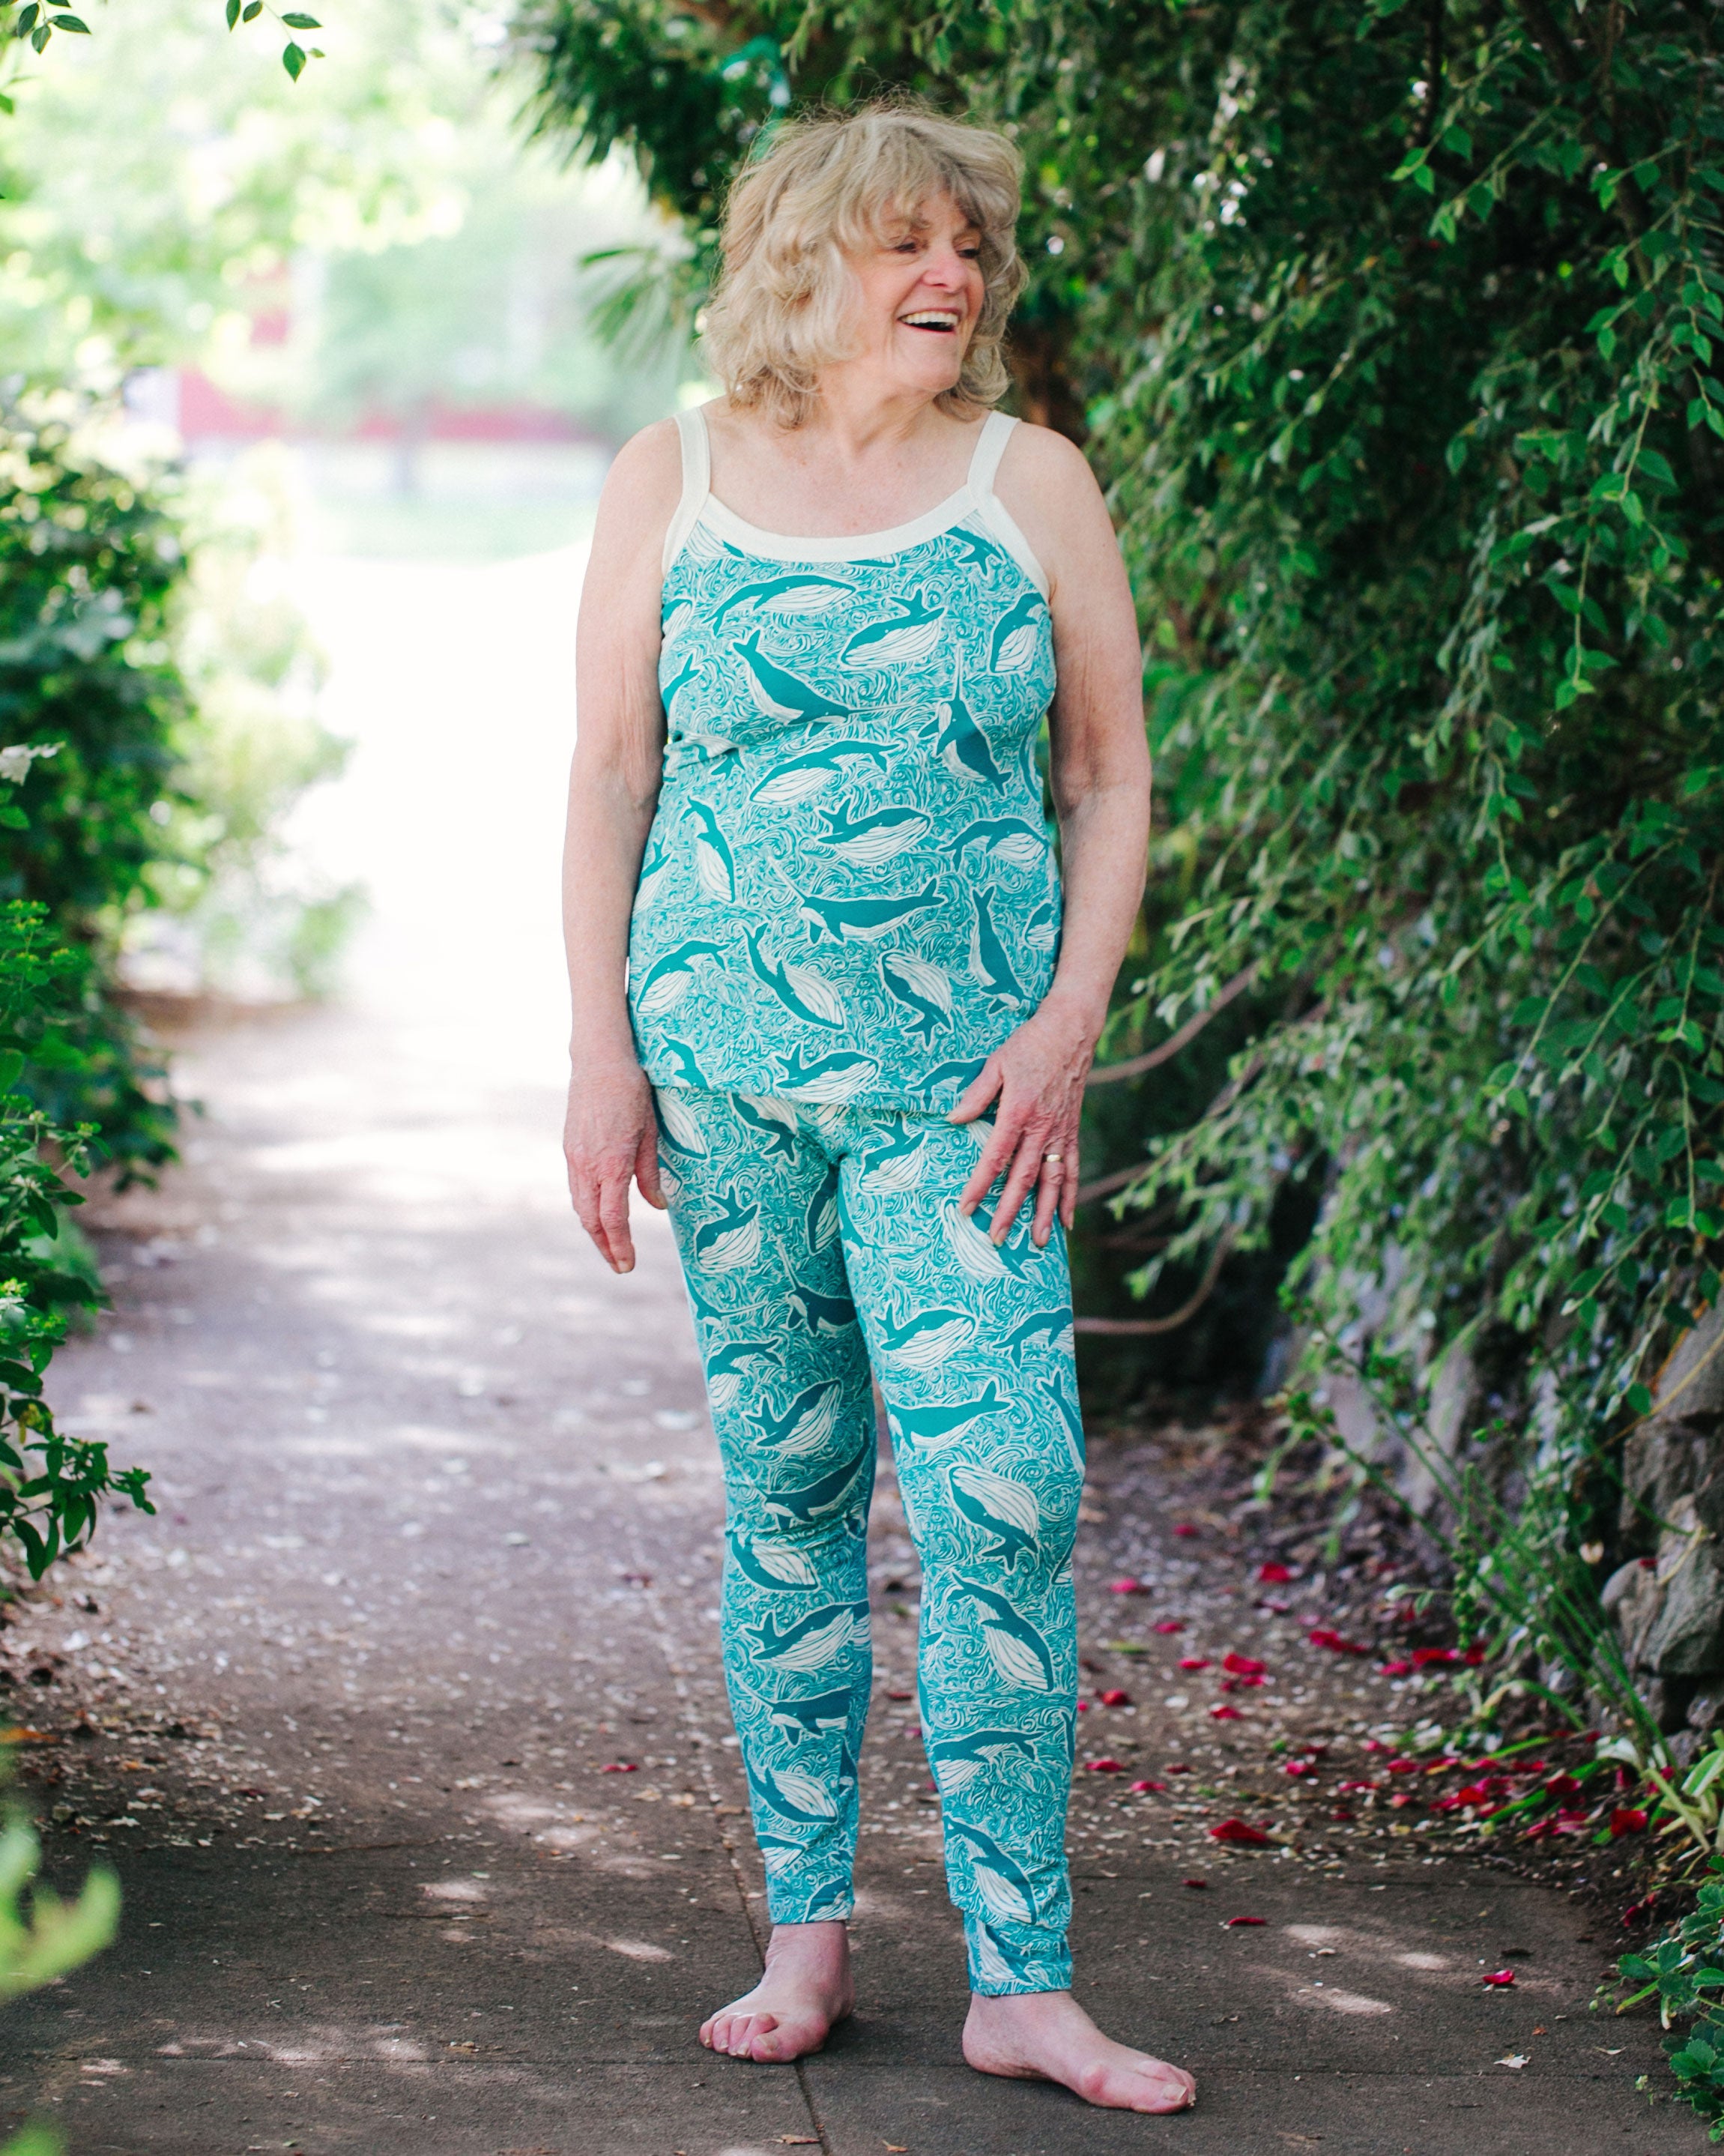 Older aged model smiling outside wearing Thunderpants organic cotton High Rise Leggings and Camisole in our Marine Whale print: turquoise whale and ocean all-over print.